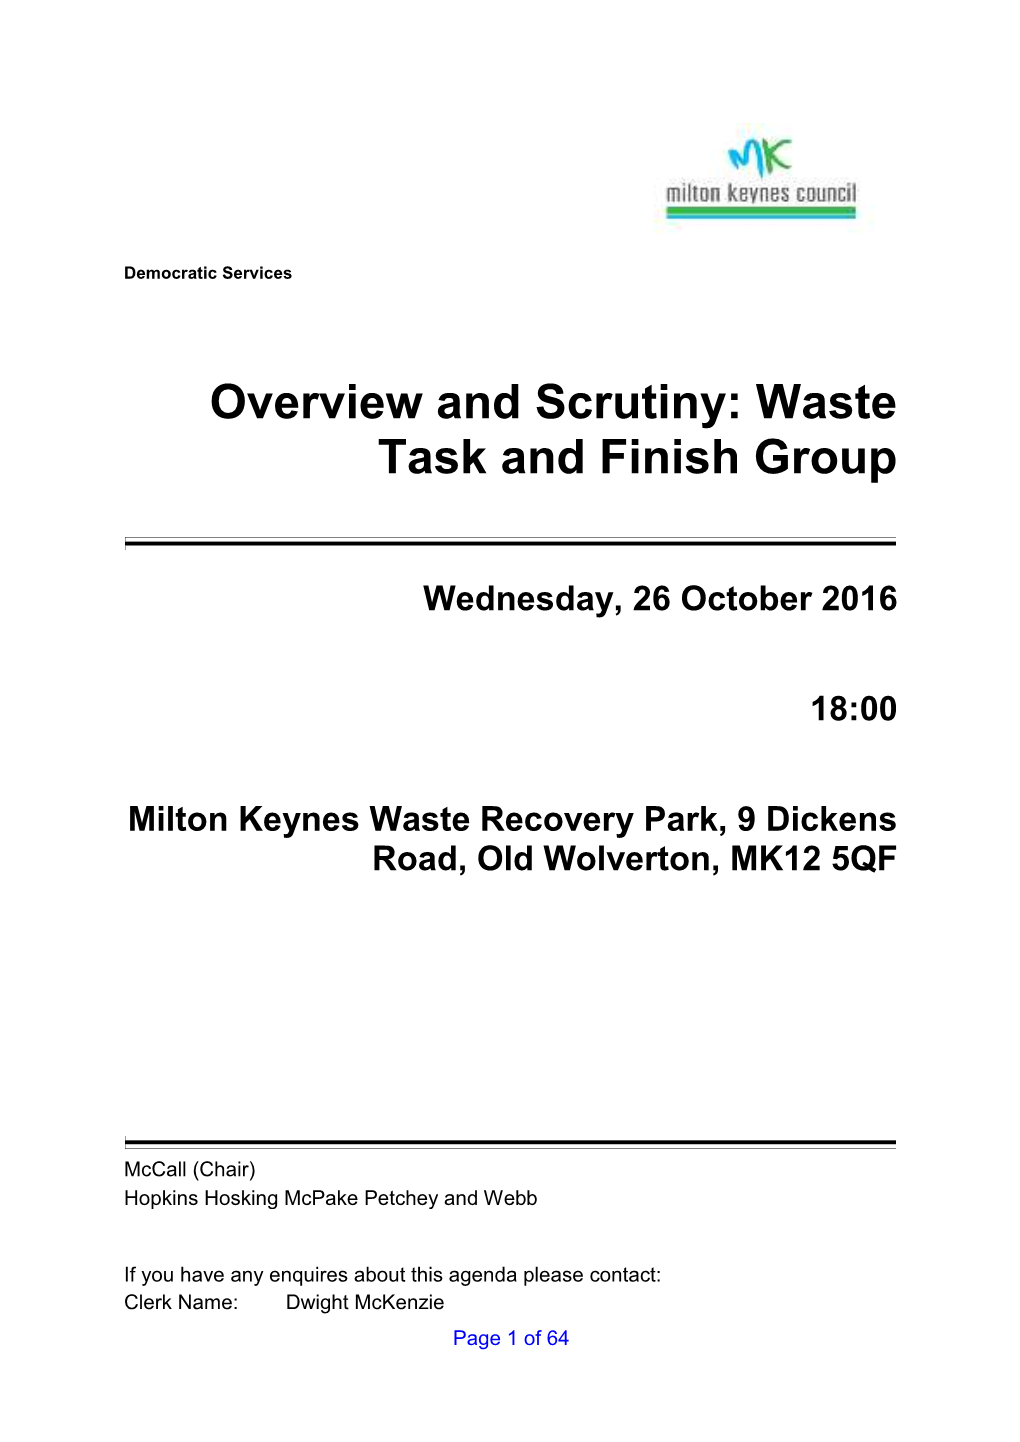 Overview and Scrutiny: Waste Task and Finish Group